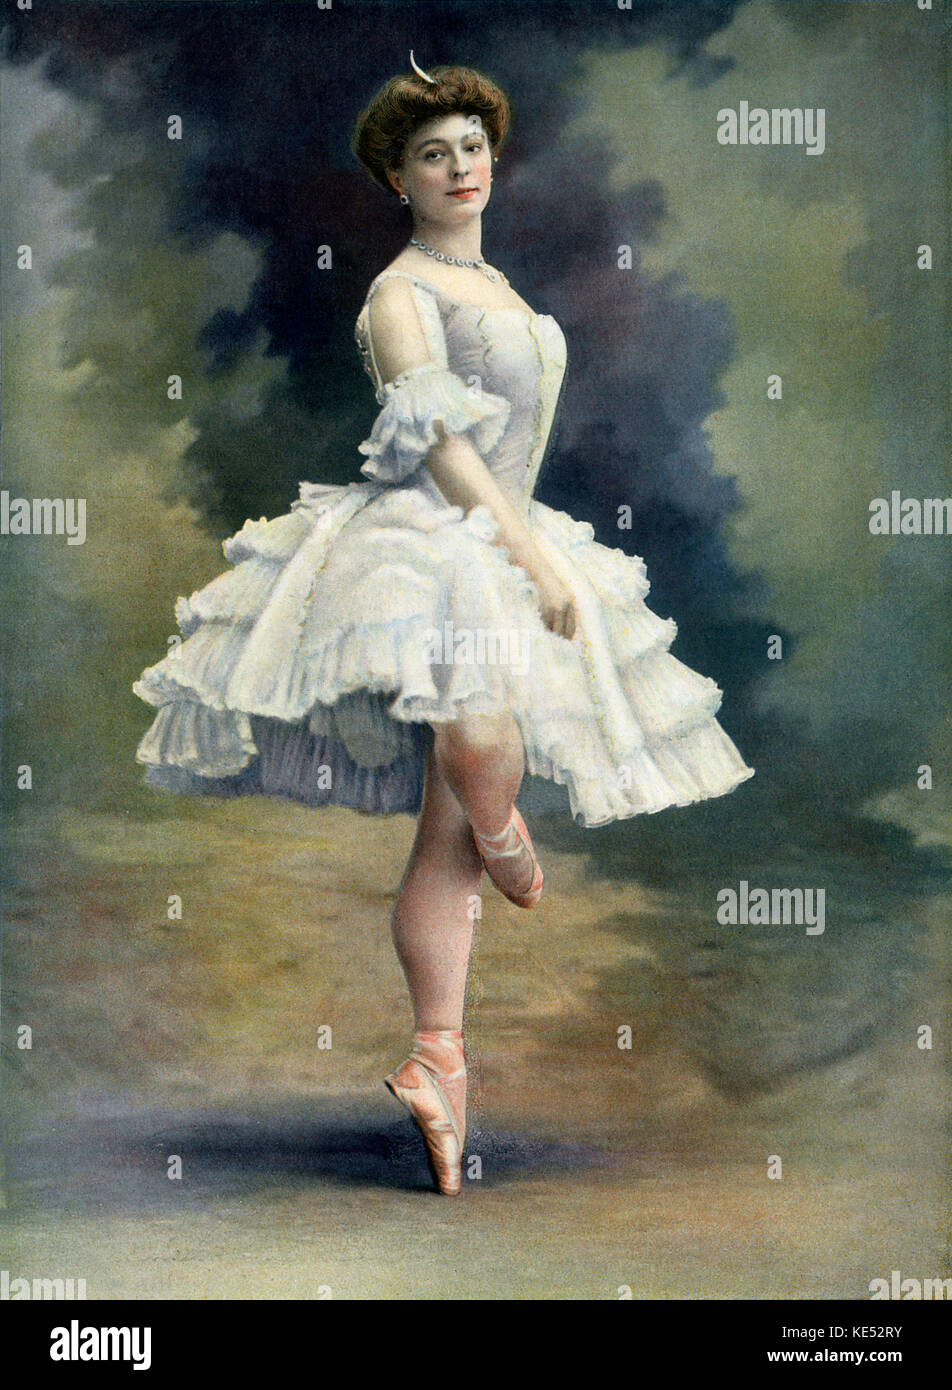 Ballerina Mlle Striscino as Zina in ballet - pantomime performance  Zino-Zina .1906 at Maisons-Laffitte at Comte / Count de Clermont-Tonnerre  grounds. Music by Paul Vidal, poem by Jean Richepin. Cover of Le